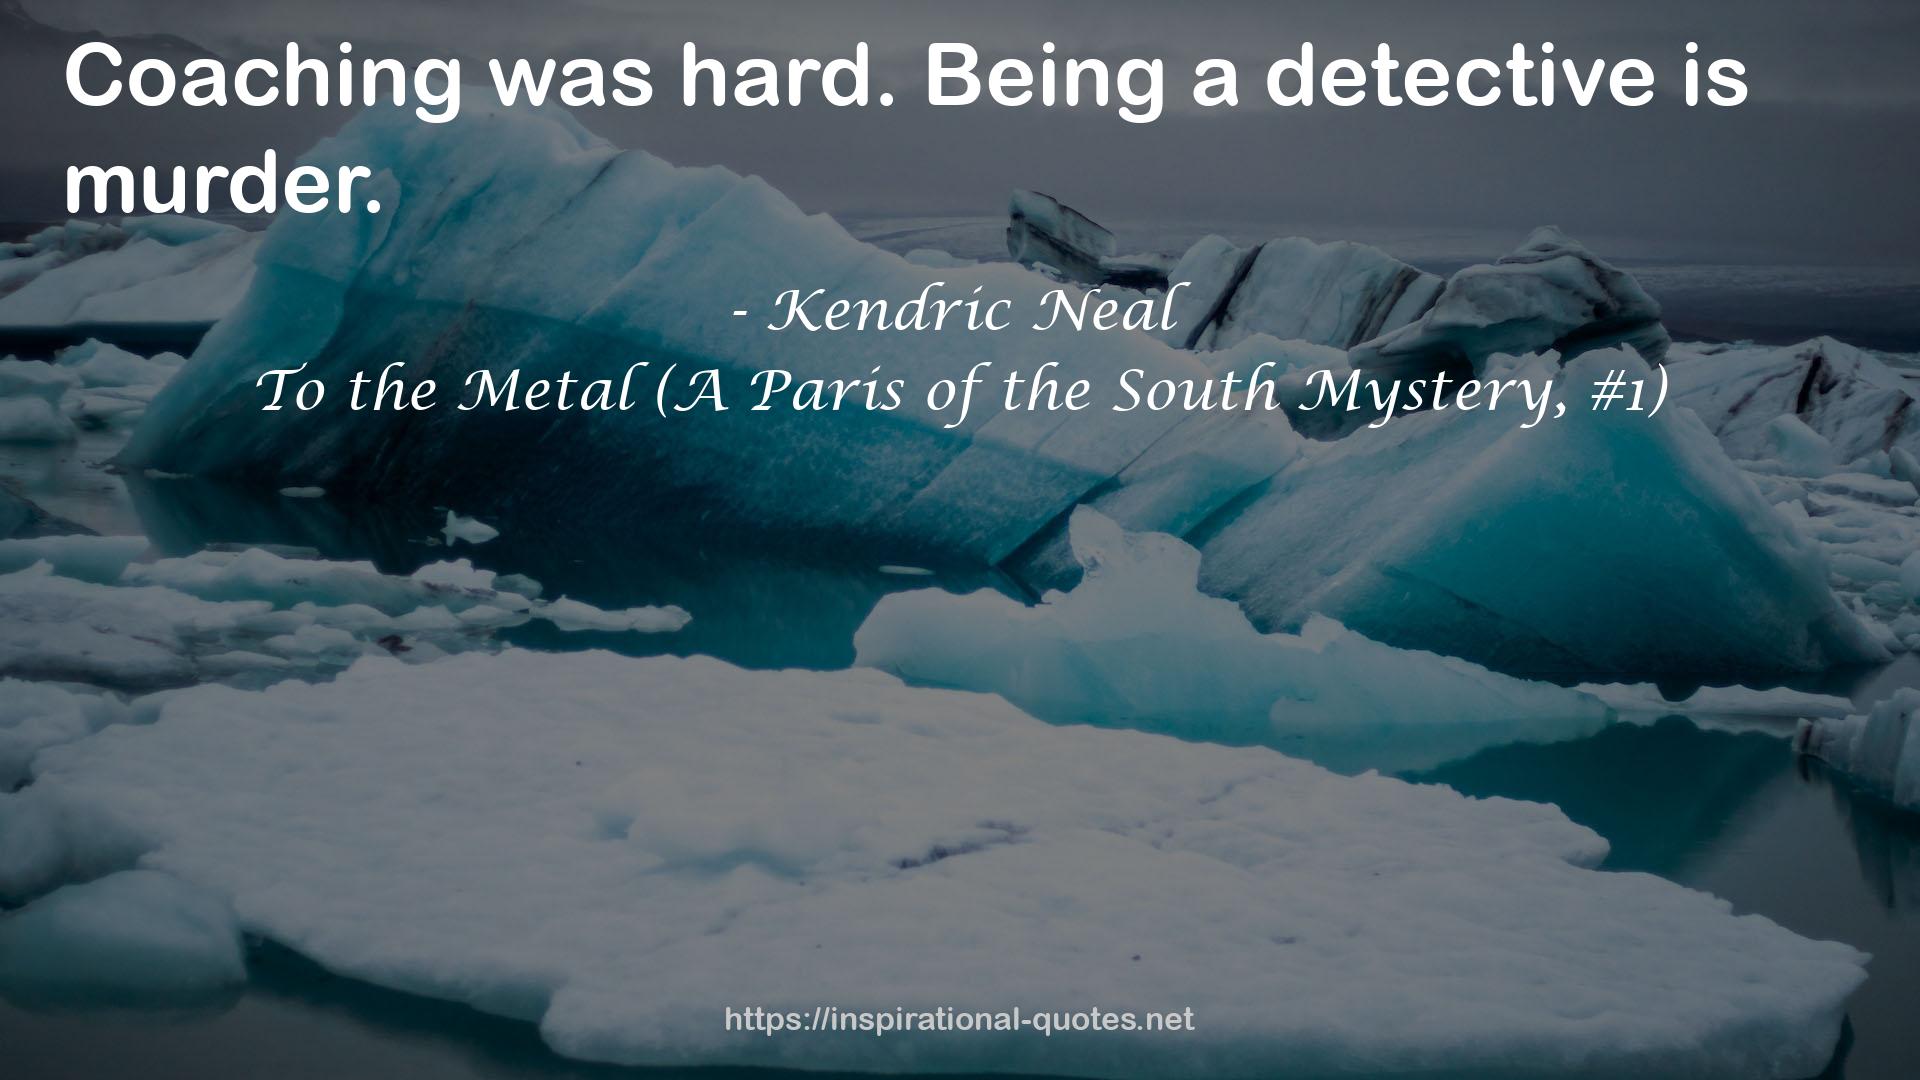 To the Metal (A Paris of the South Mystery, #1) QUOTES